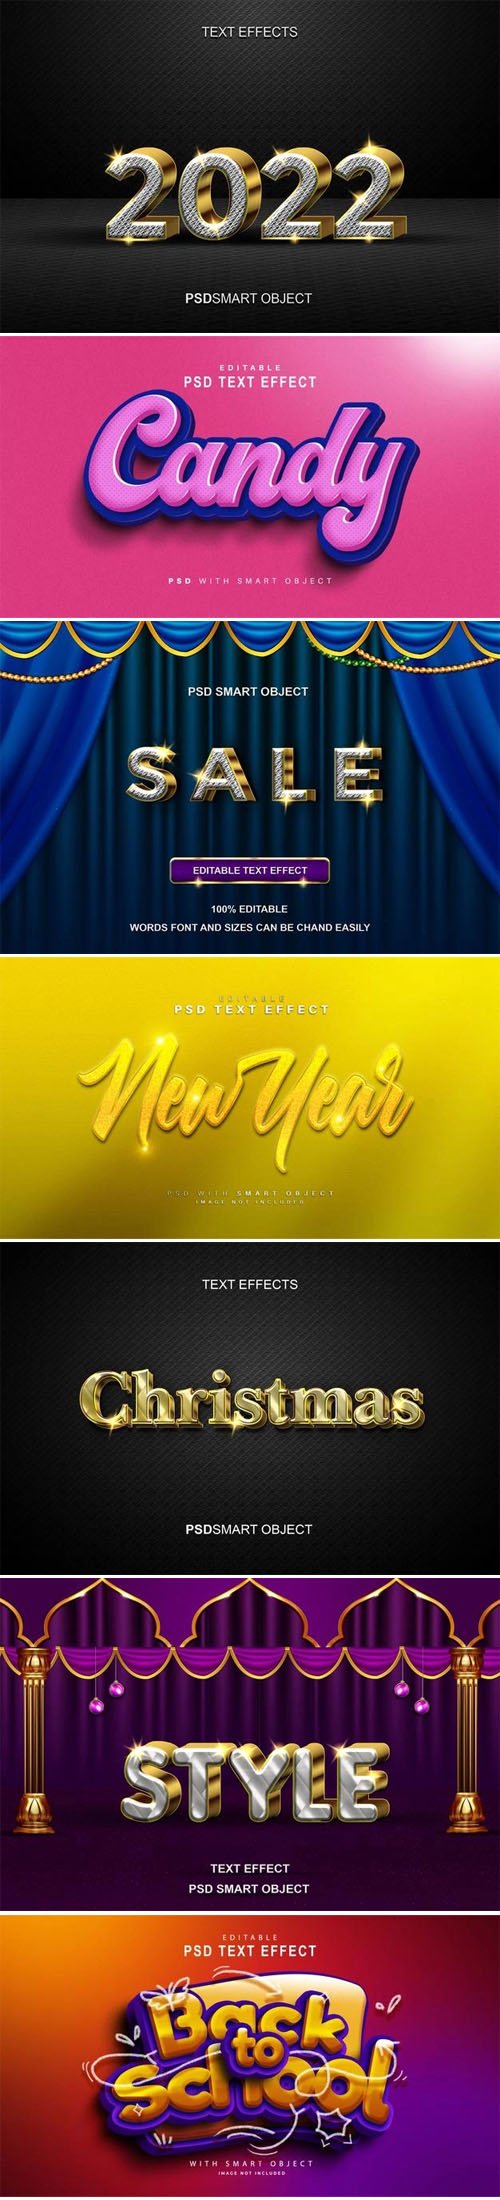 14 New Text Effects PSD Templates Collection